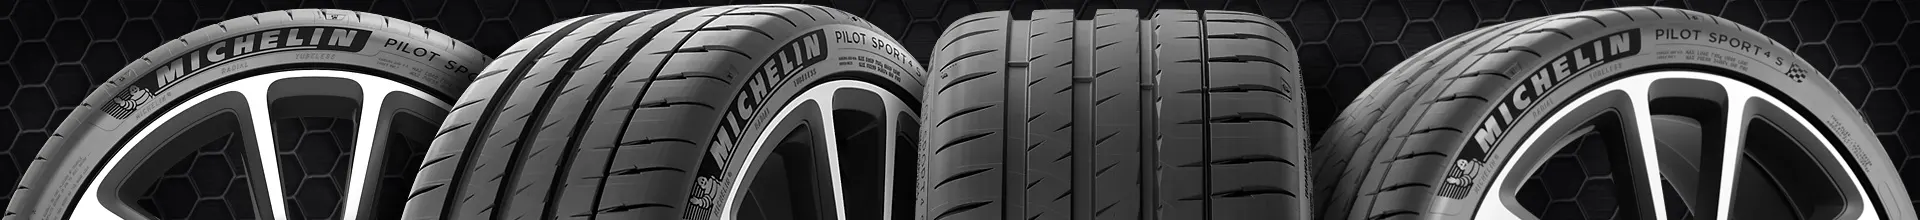 35 12.5 22 discount tires from Online Wheels Direct